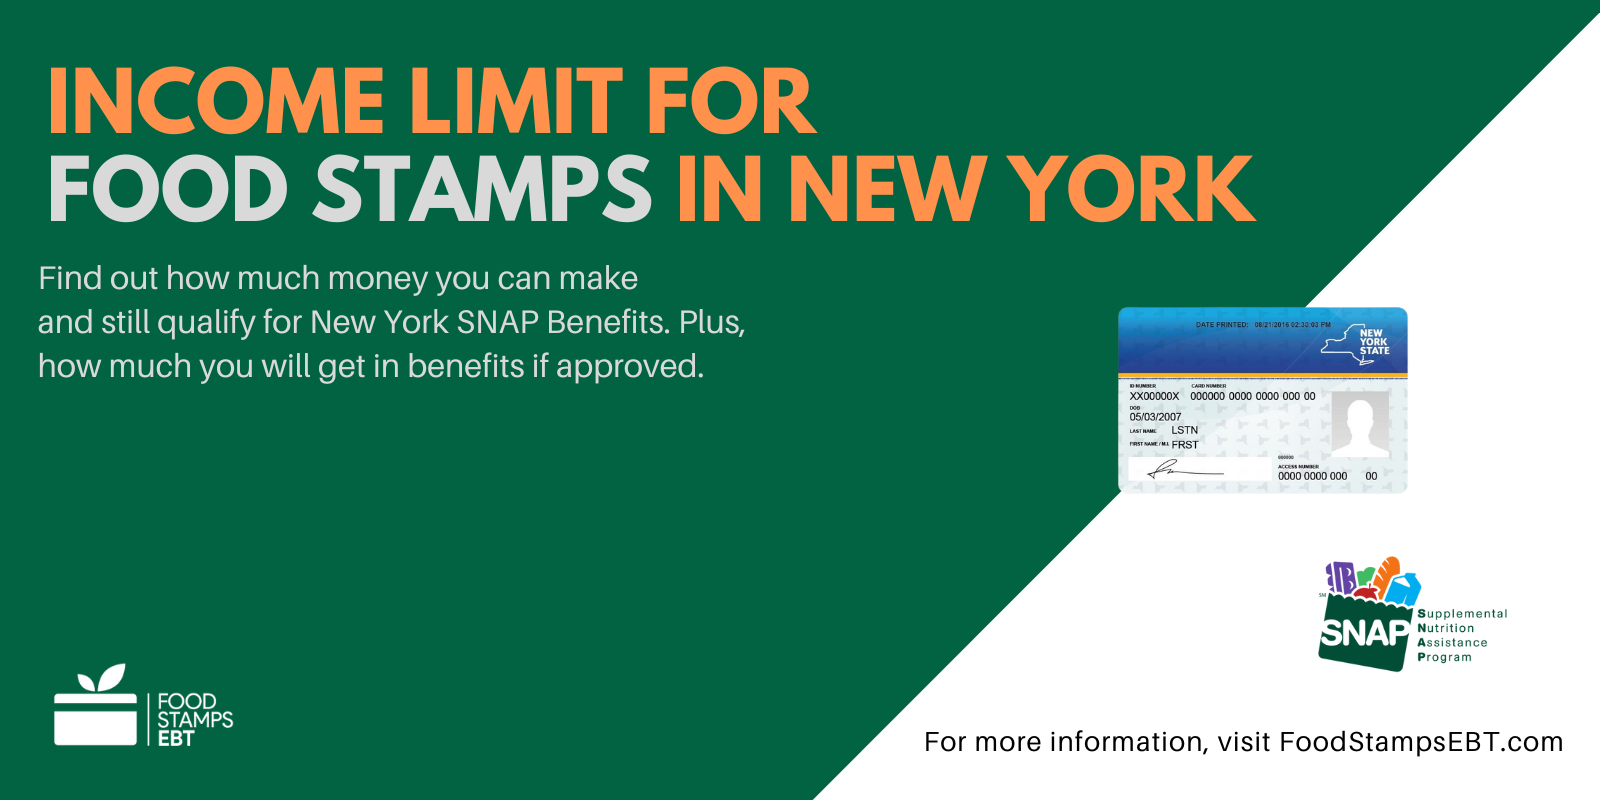 "Income Limit for Food Stamps in New York"